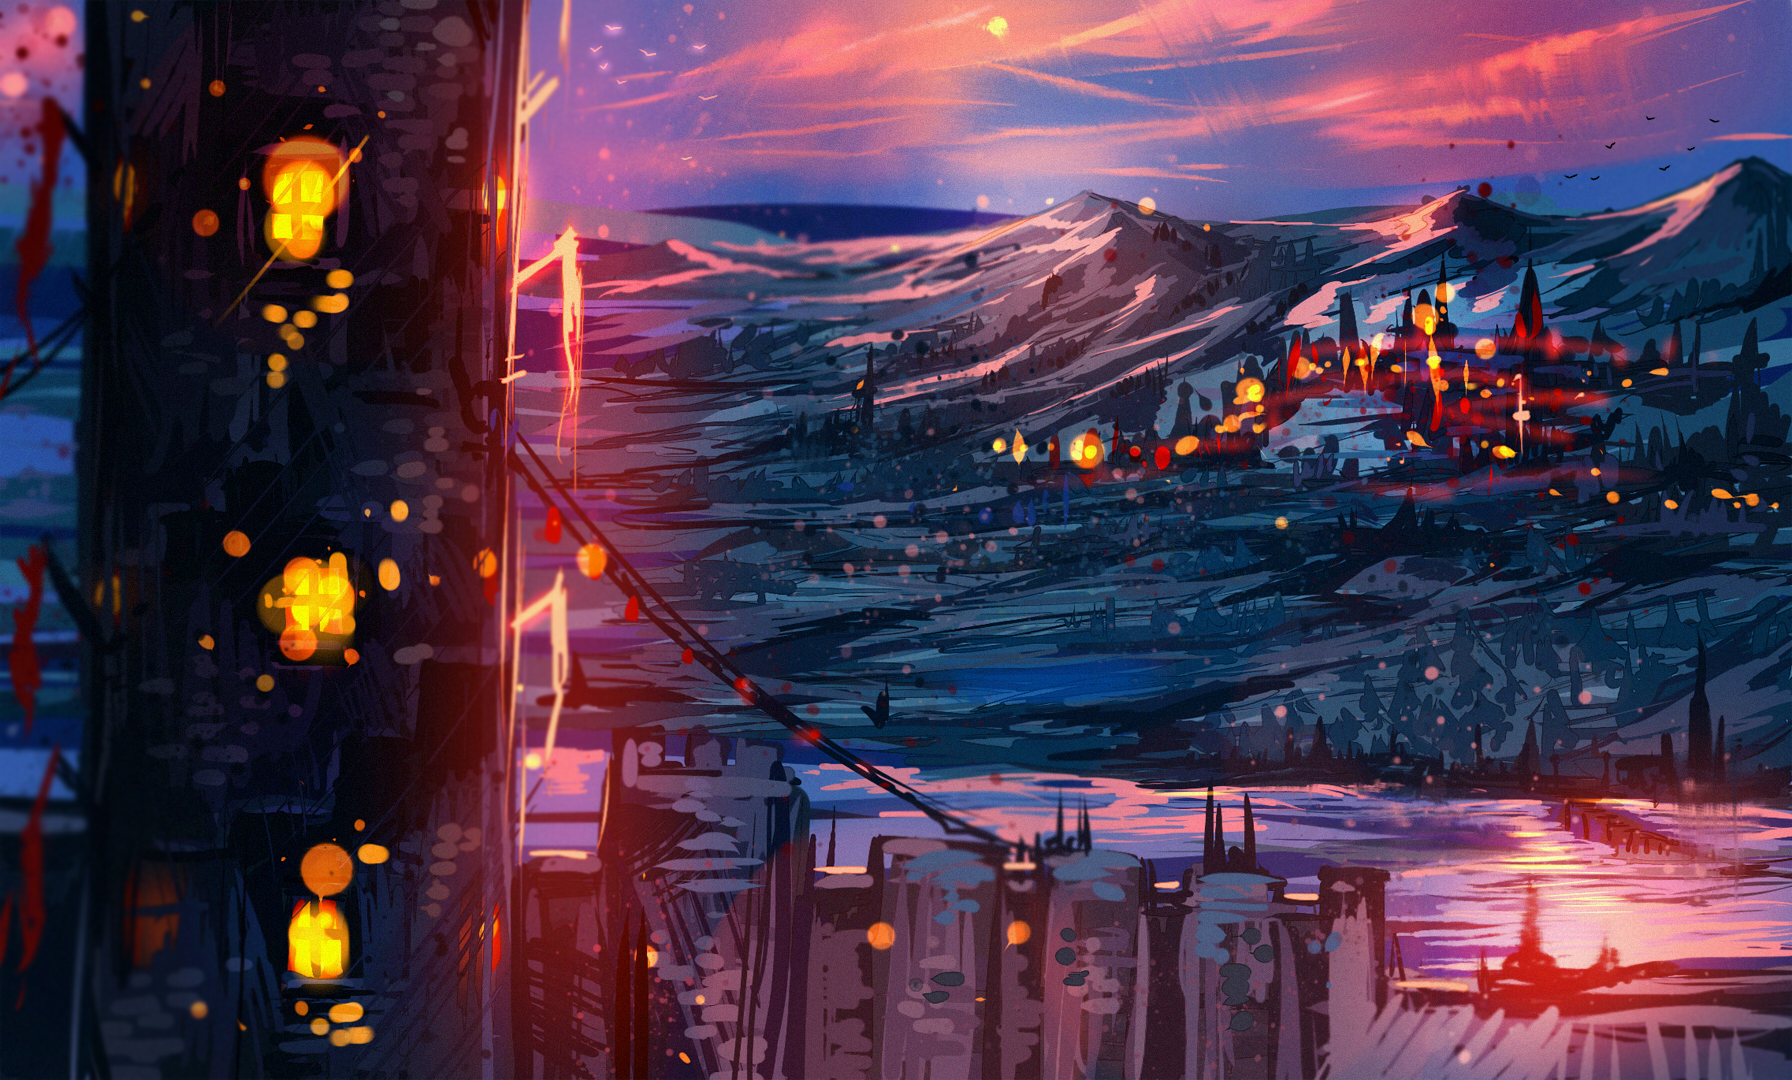 Ryky Painting Digital Art Cityscape Mountains 1792x1080